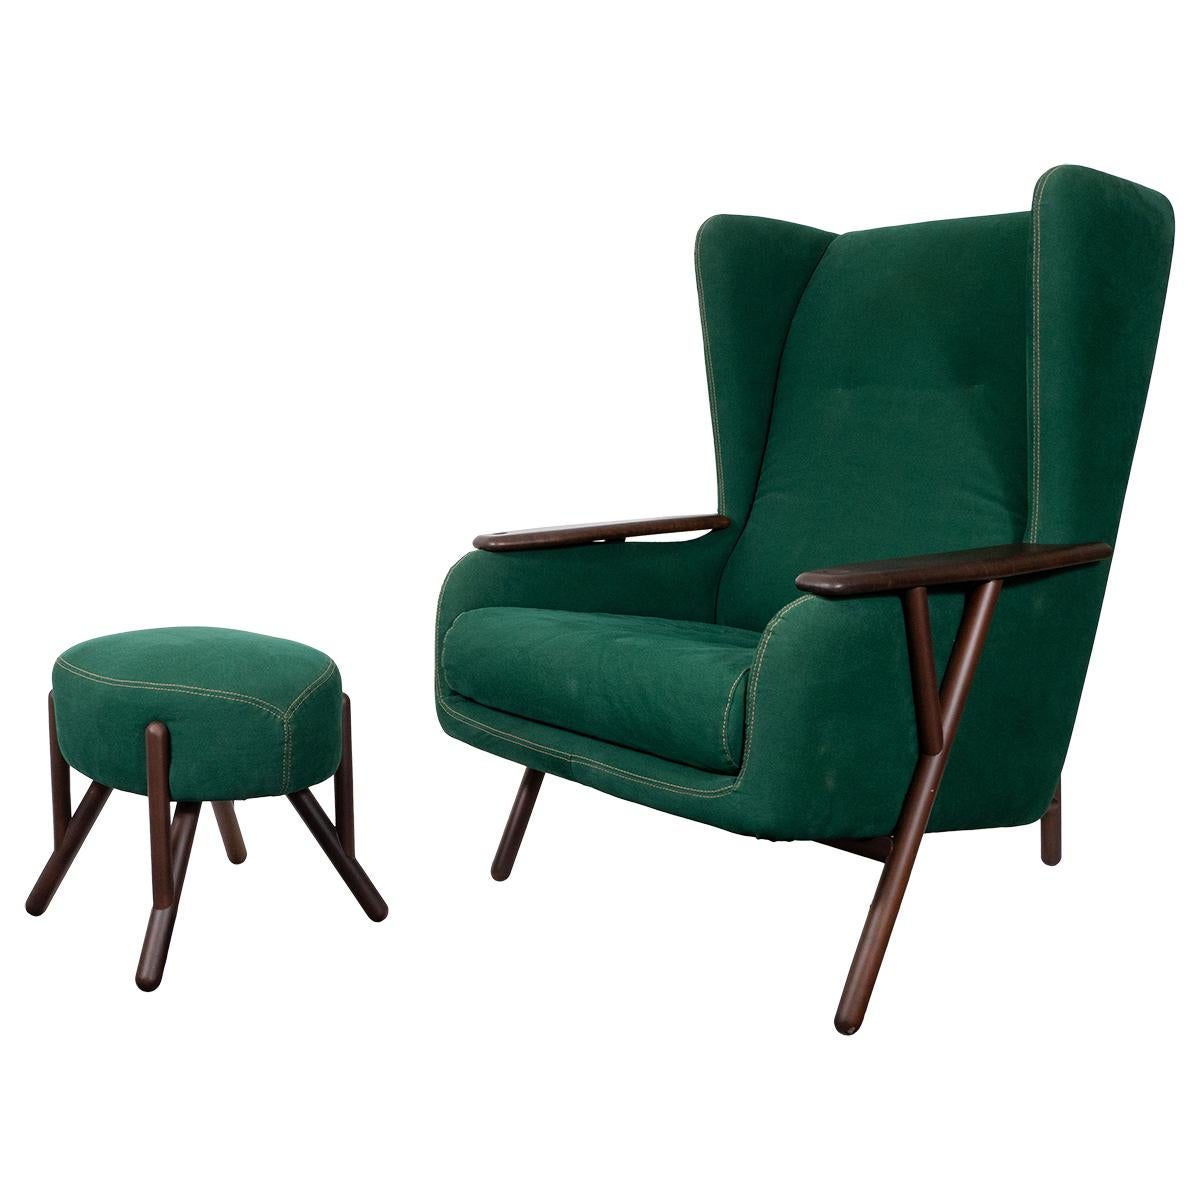 Mogens Hansen Wingback Chairs - 2 For Sale at 1stDibs